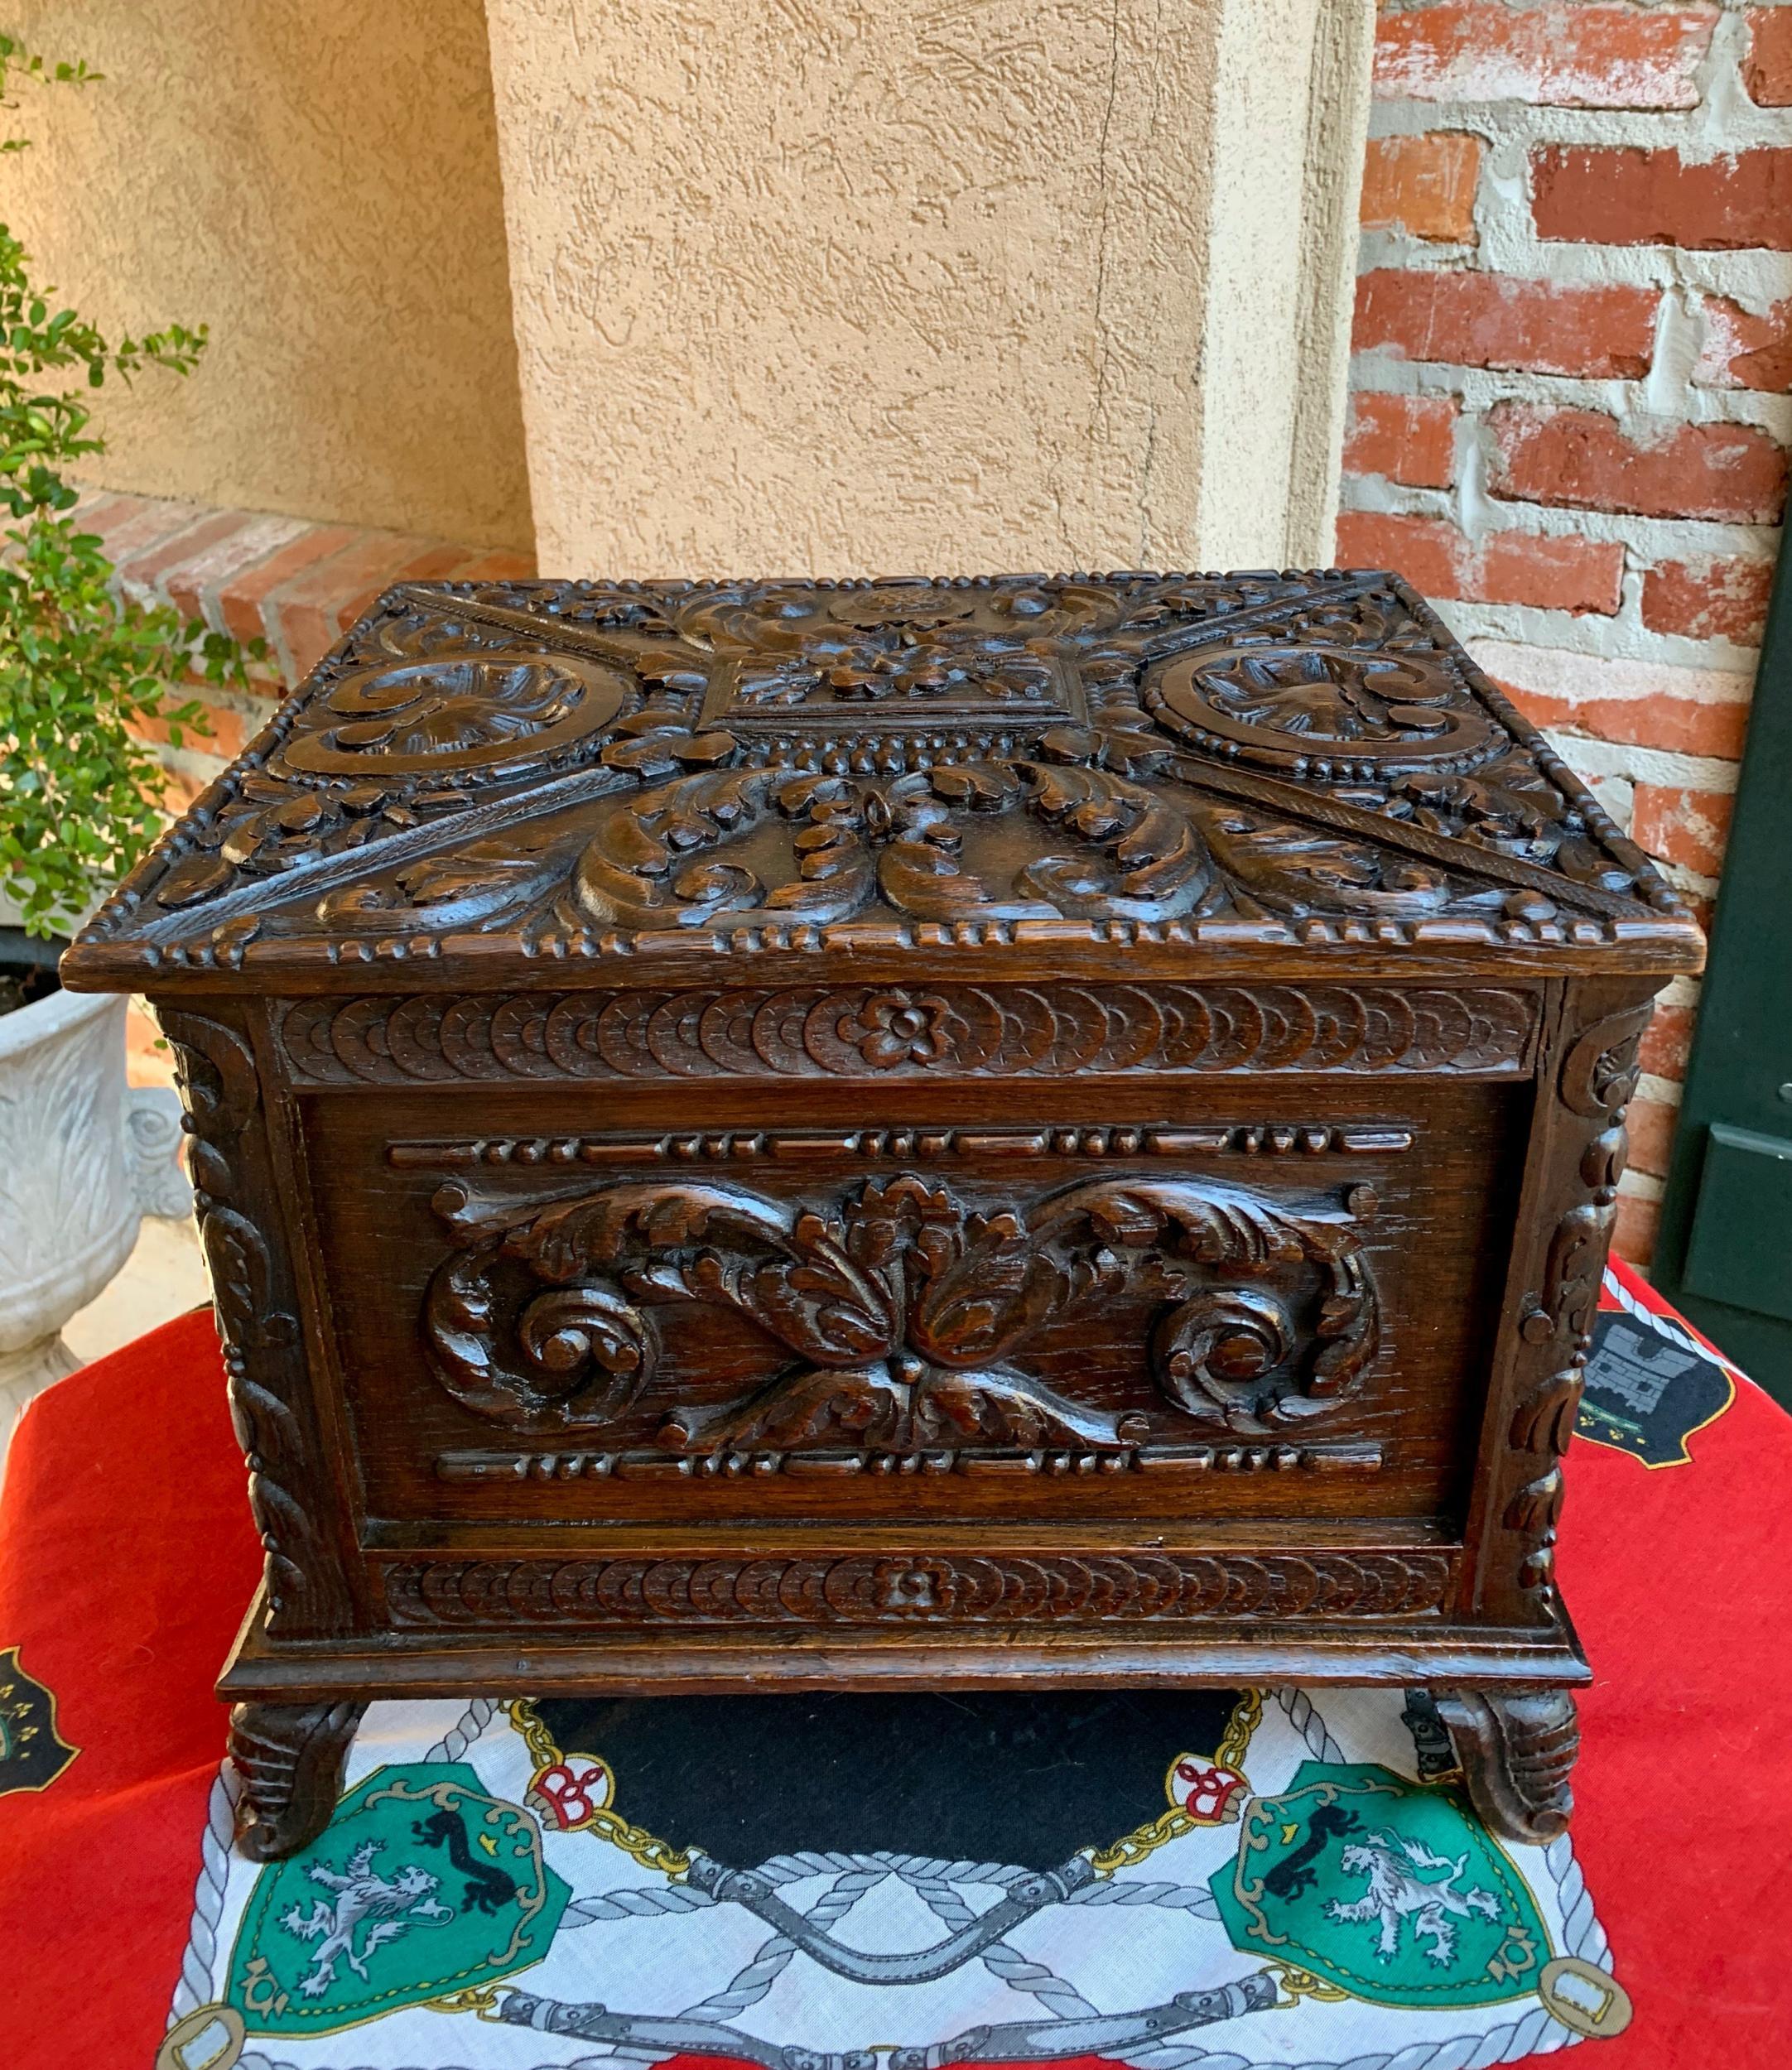 Antique French carved oak letter desk box Black Forest jewelry collector case

~Direct from France~
~Ornately carved antique French desk or letter box~
~Fully carved, Black Forest style, on all sides, front and back!~
~Each panel features